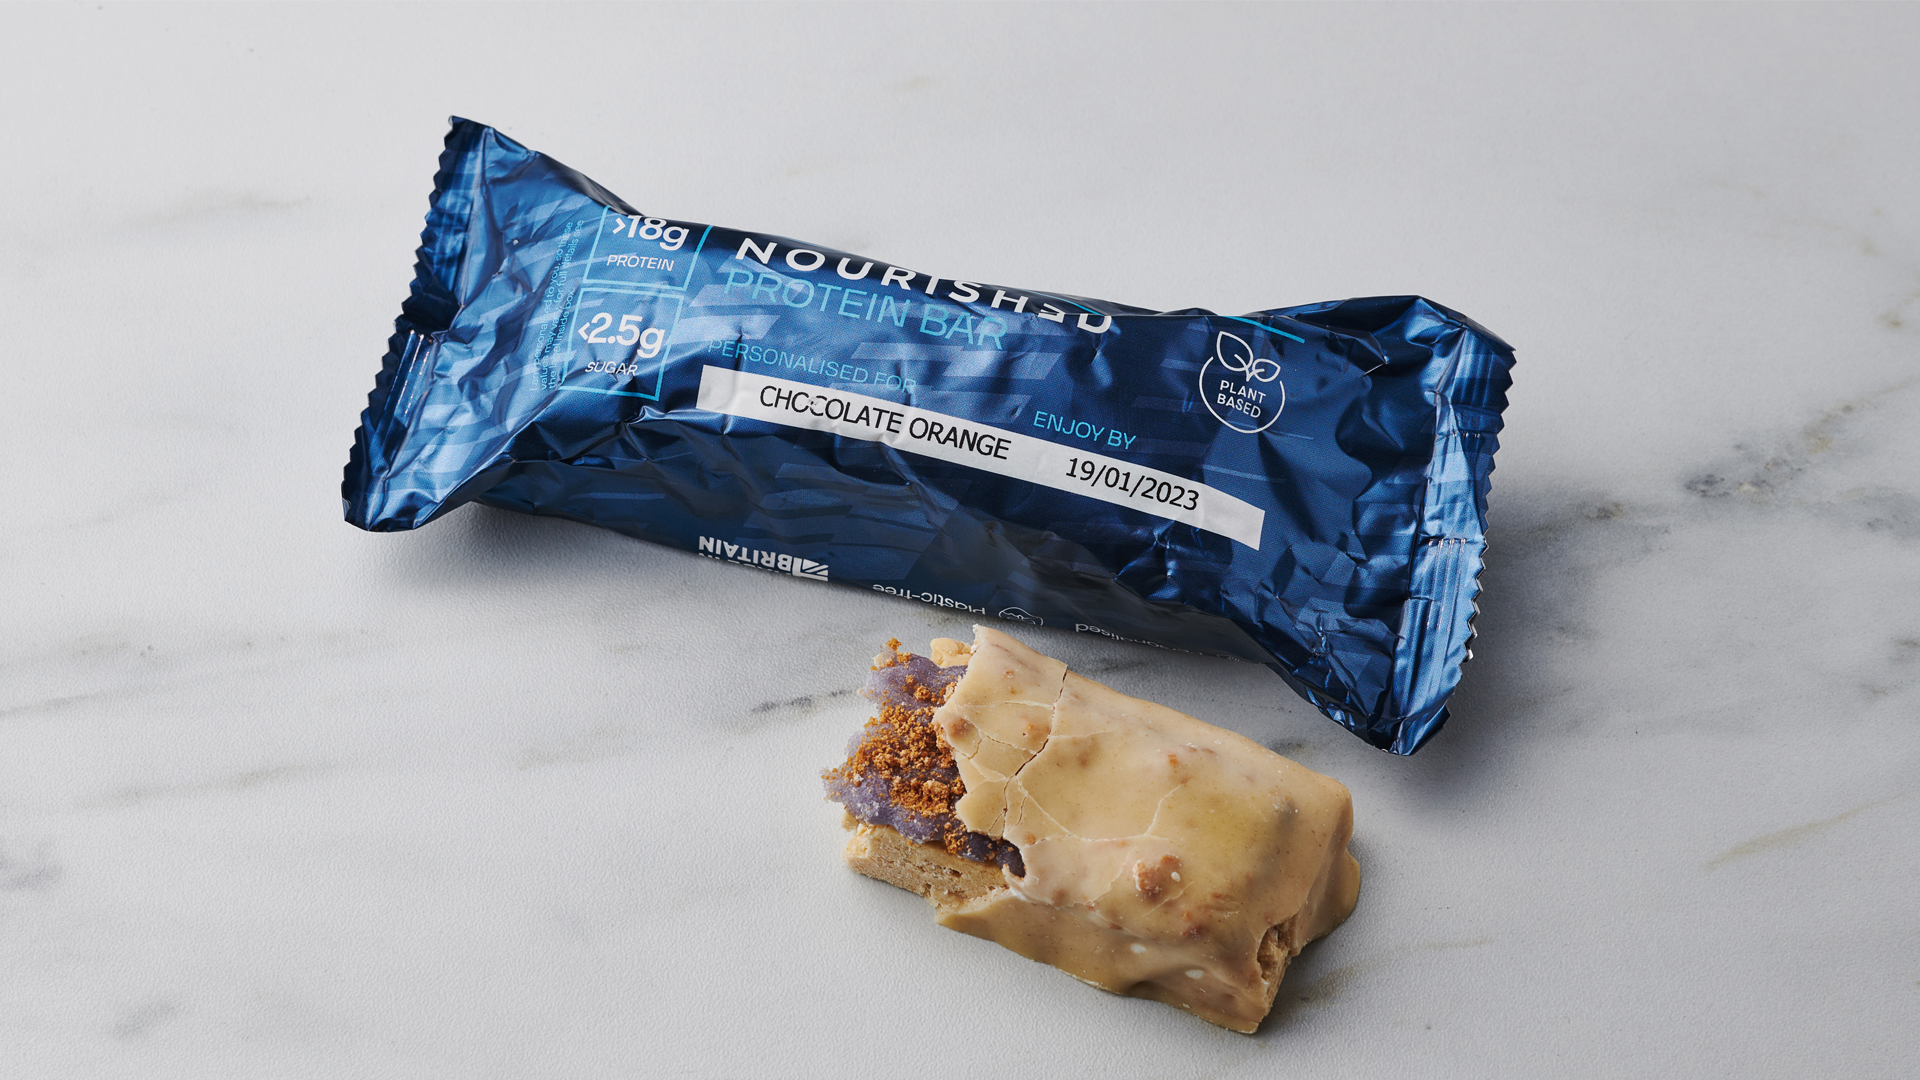 Nourished protein bar